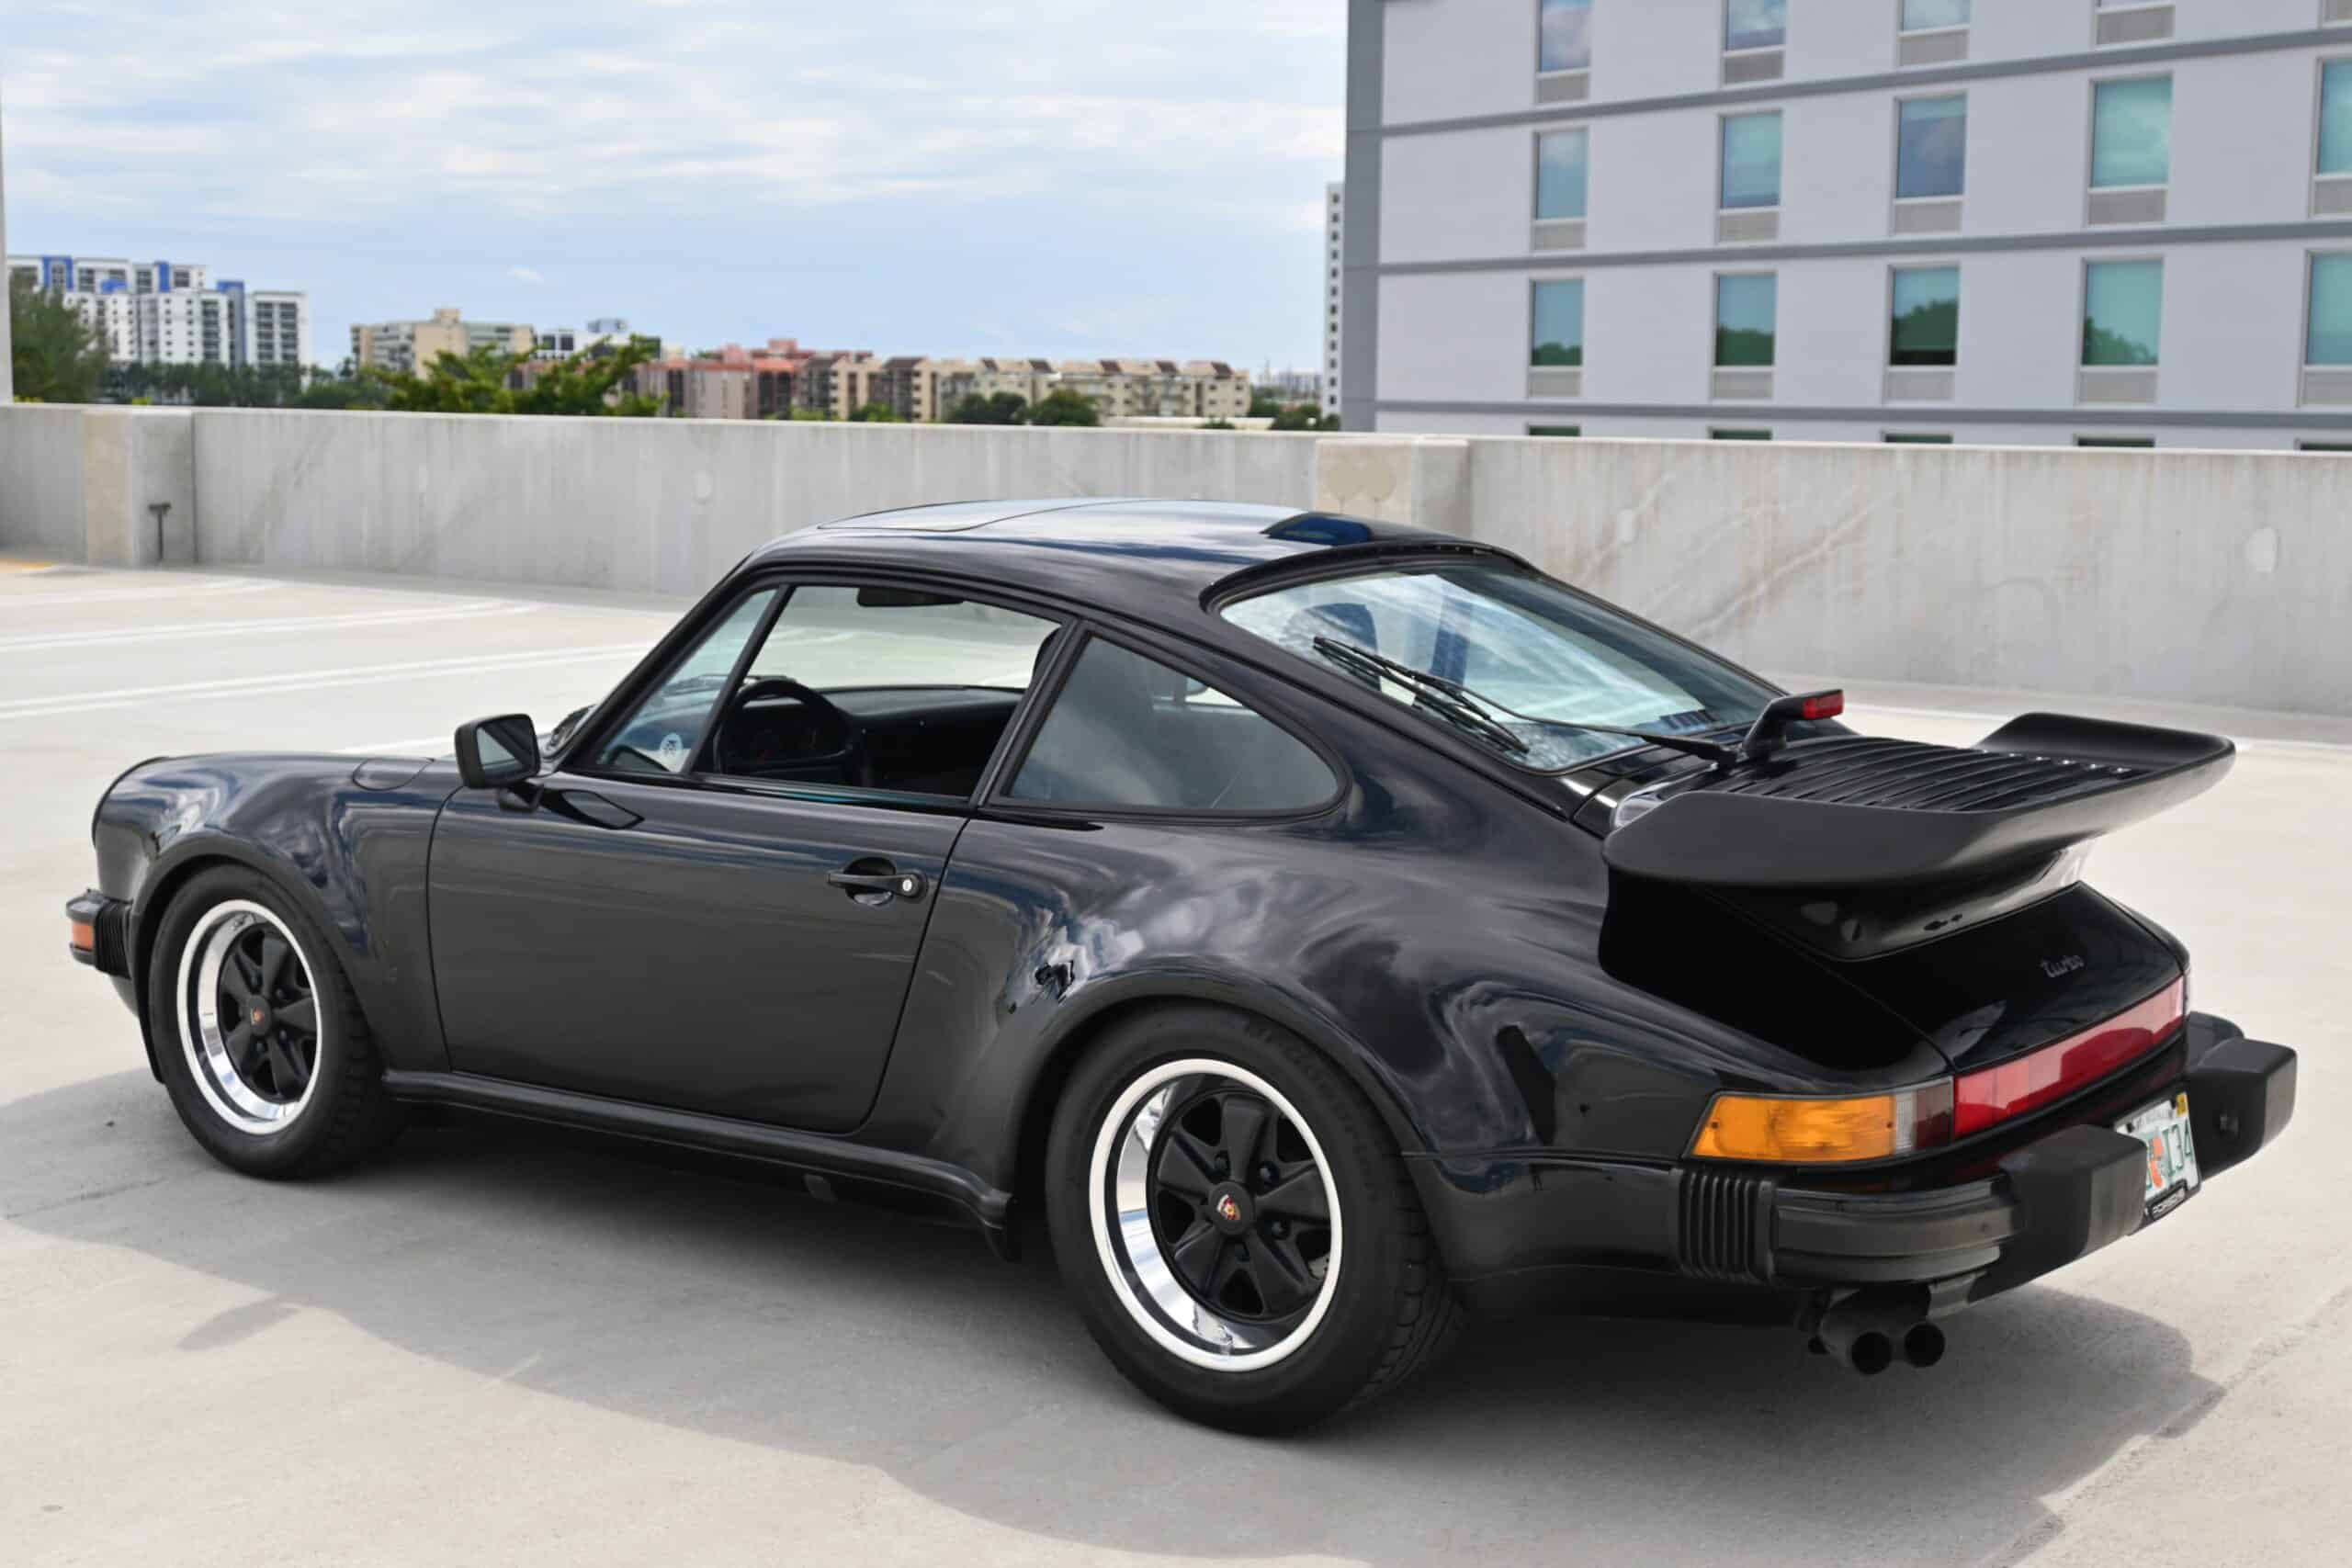 1987 Porsche 911 Turbo 930 Only 43K Miles / Turbo Fuchs / Matching Numbers / Original Paint